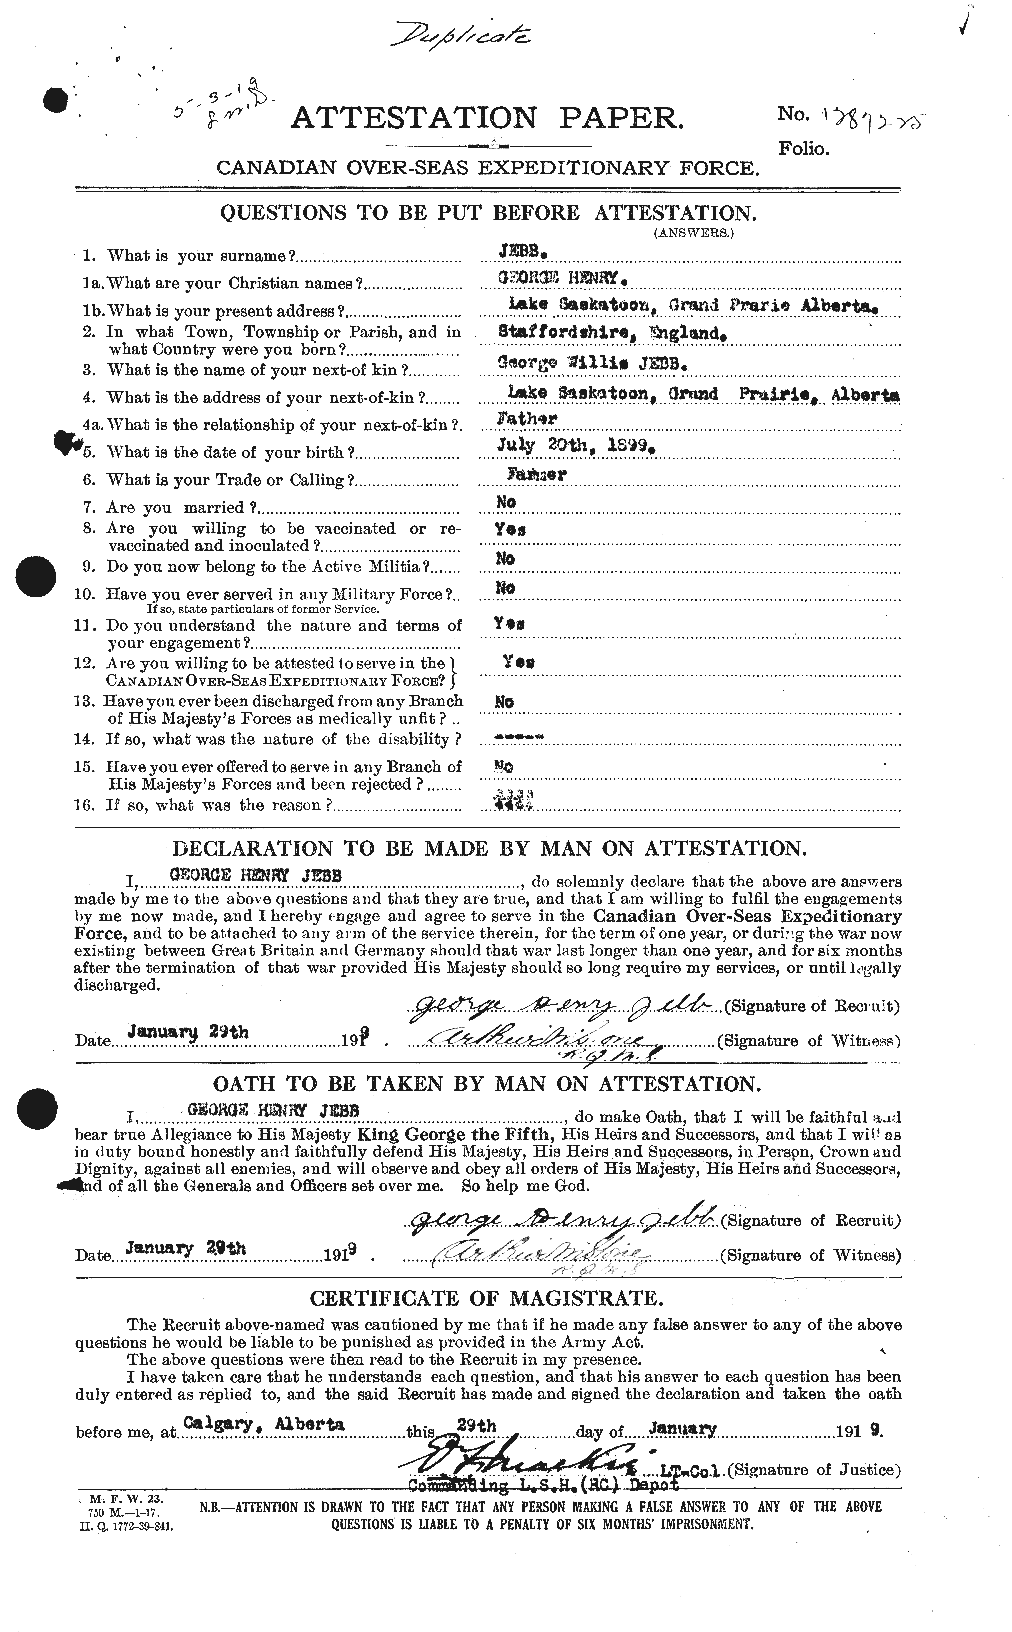 Personnel Records of the First World War - CEF 416155a